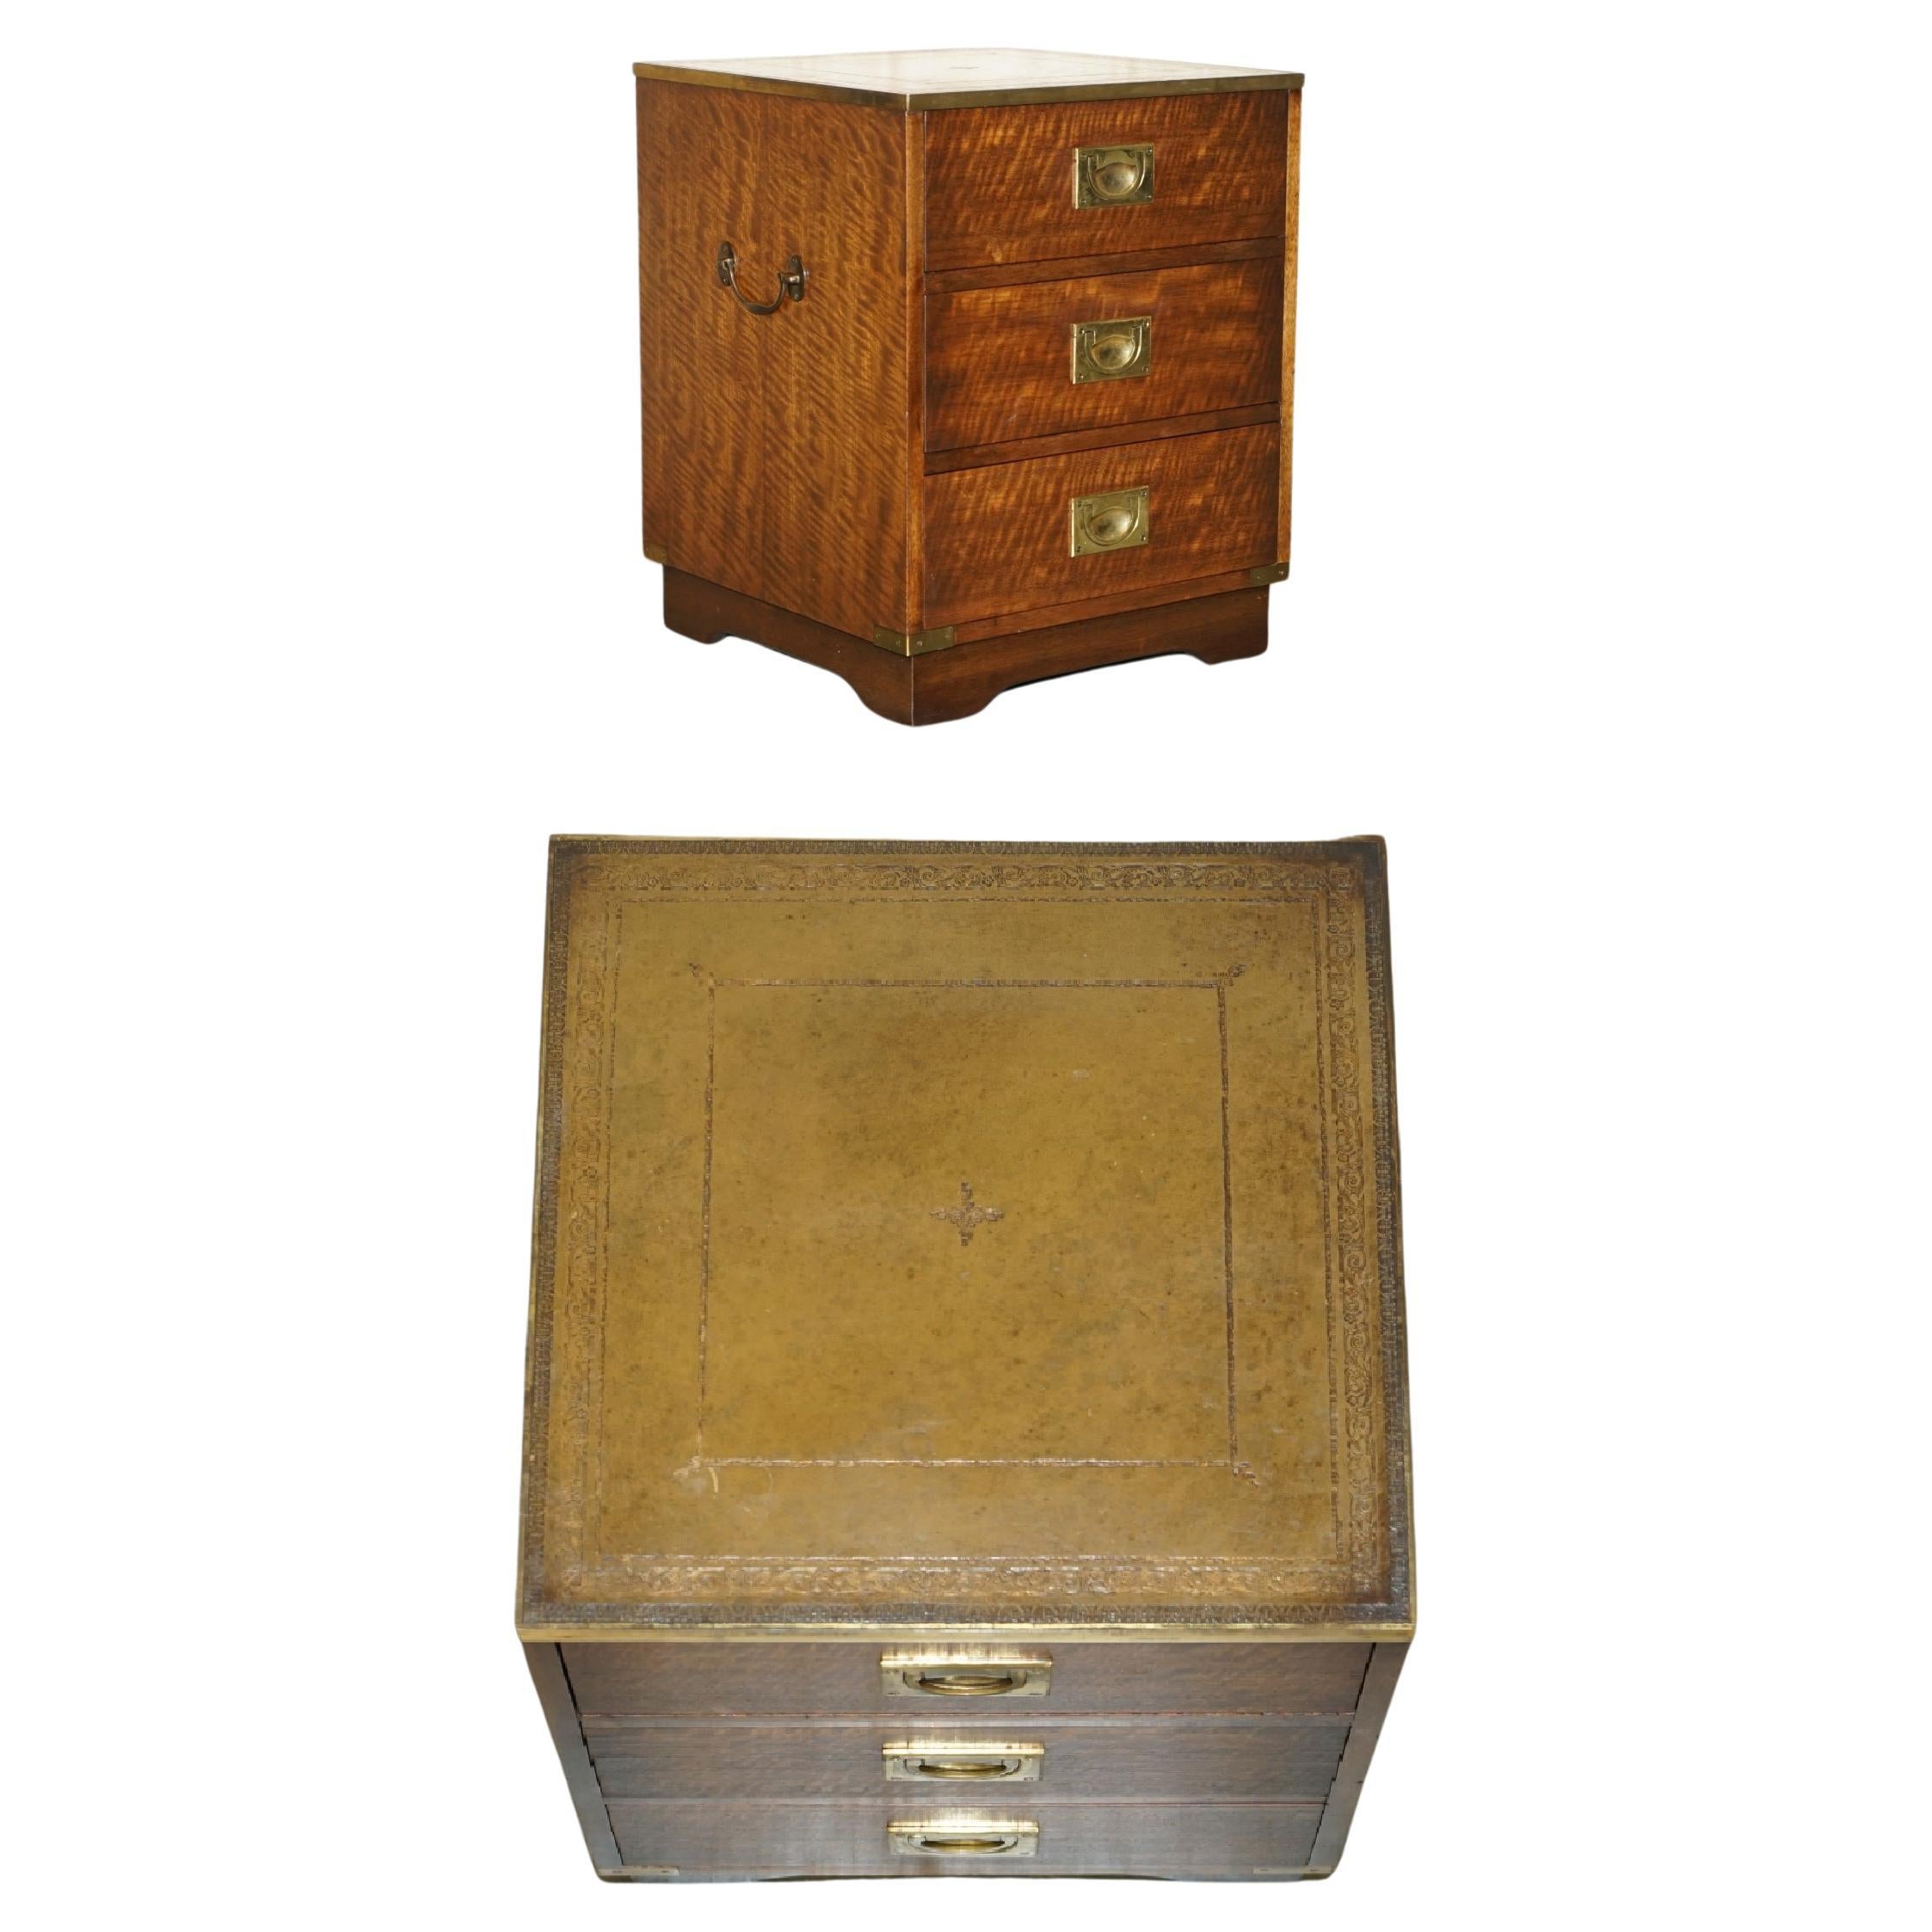 HARRODS KENNEDY Campagne MILITAIRE STUNNING TABLE DRAWERS GREEN LEATHER en vente